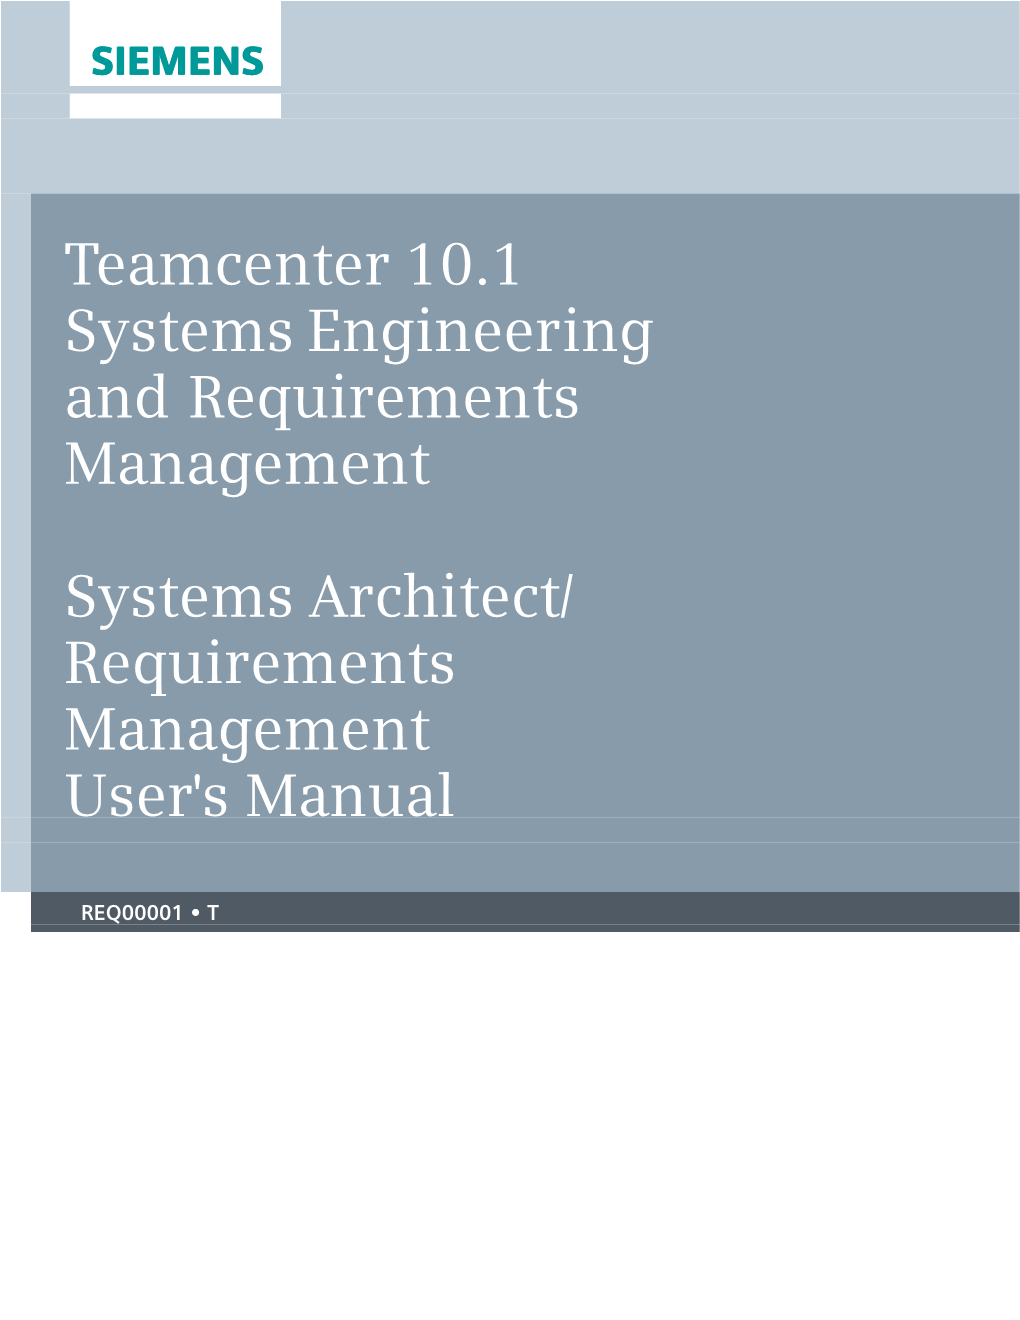 Requirements Management User's Manual